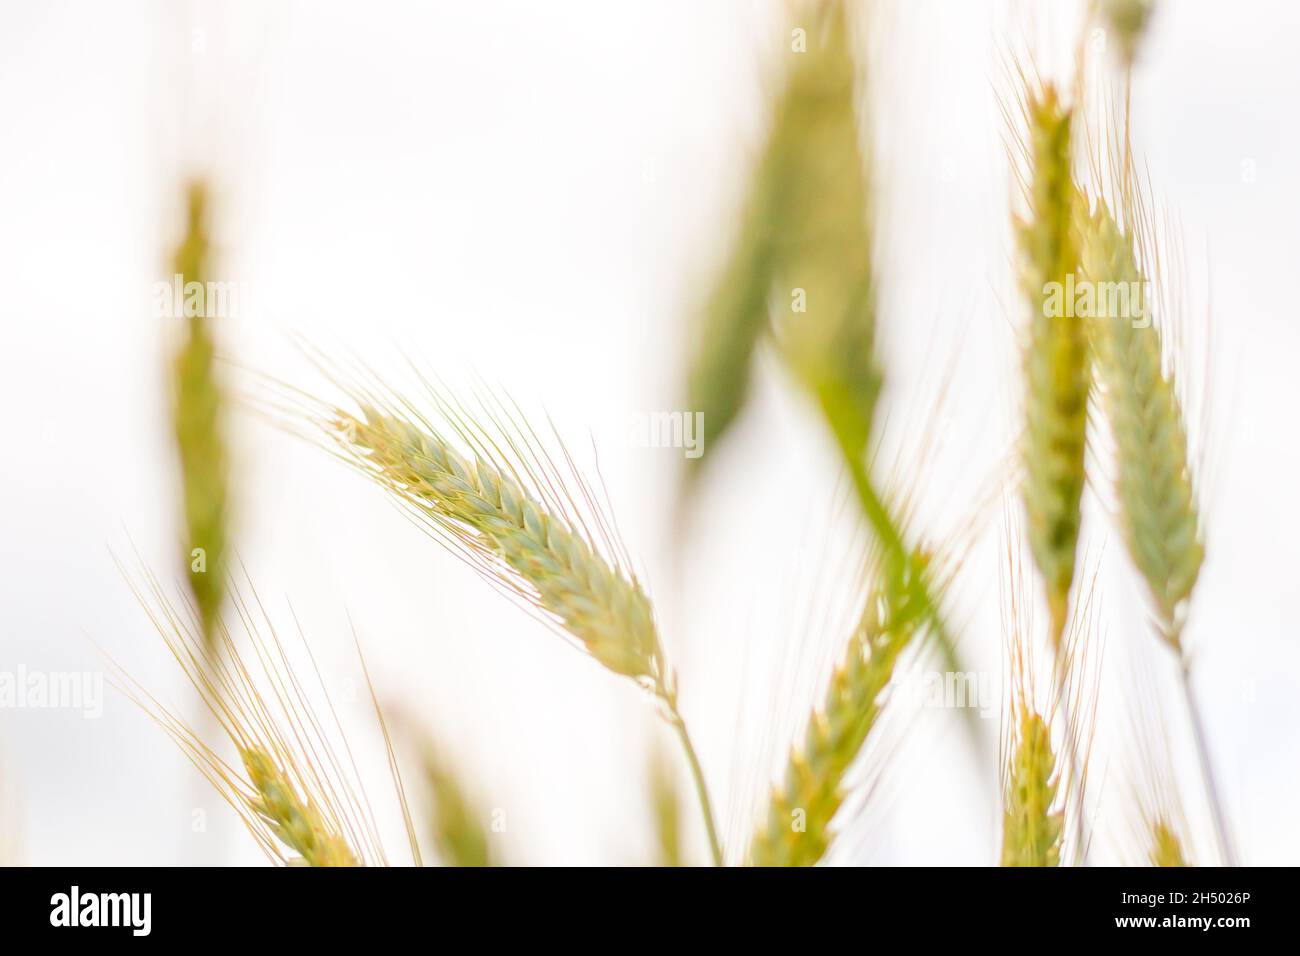 ears of grain in a grain field - a close-up view of Triticale ears Stock Photo